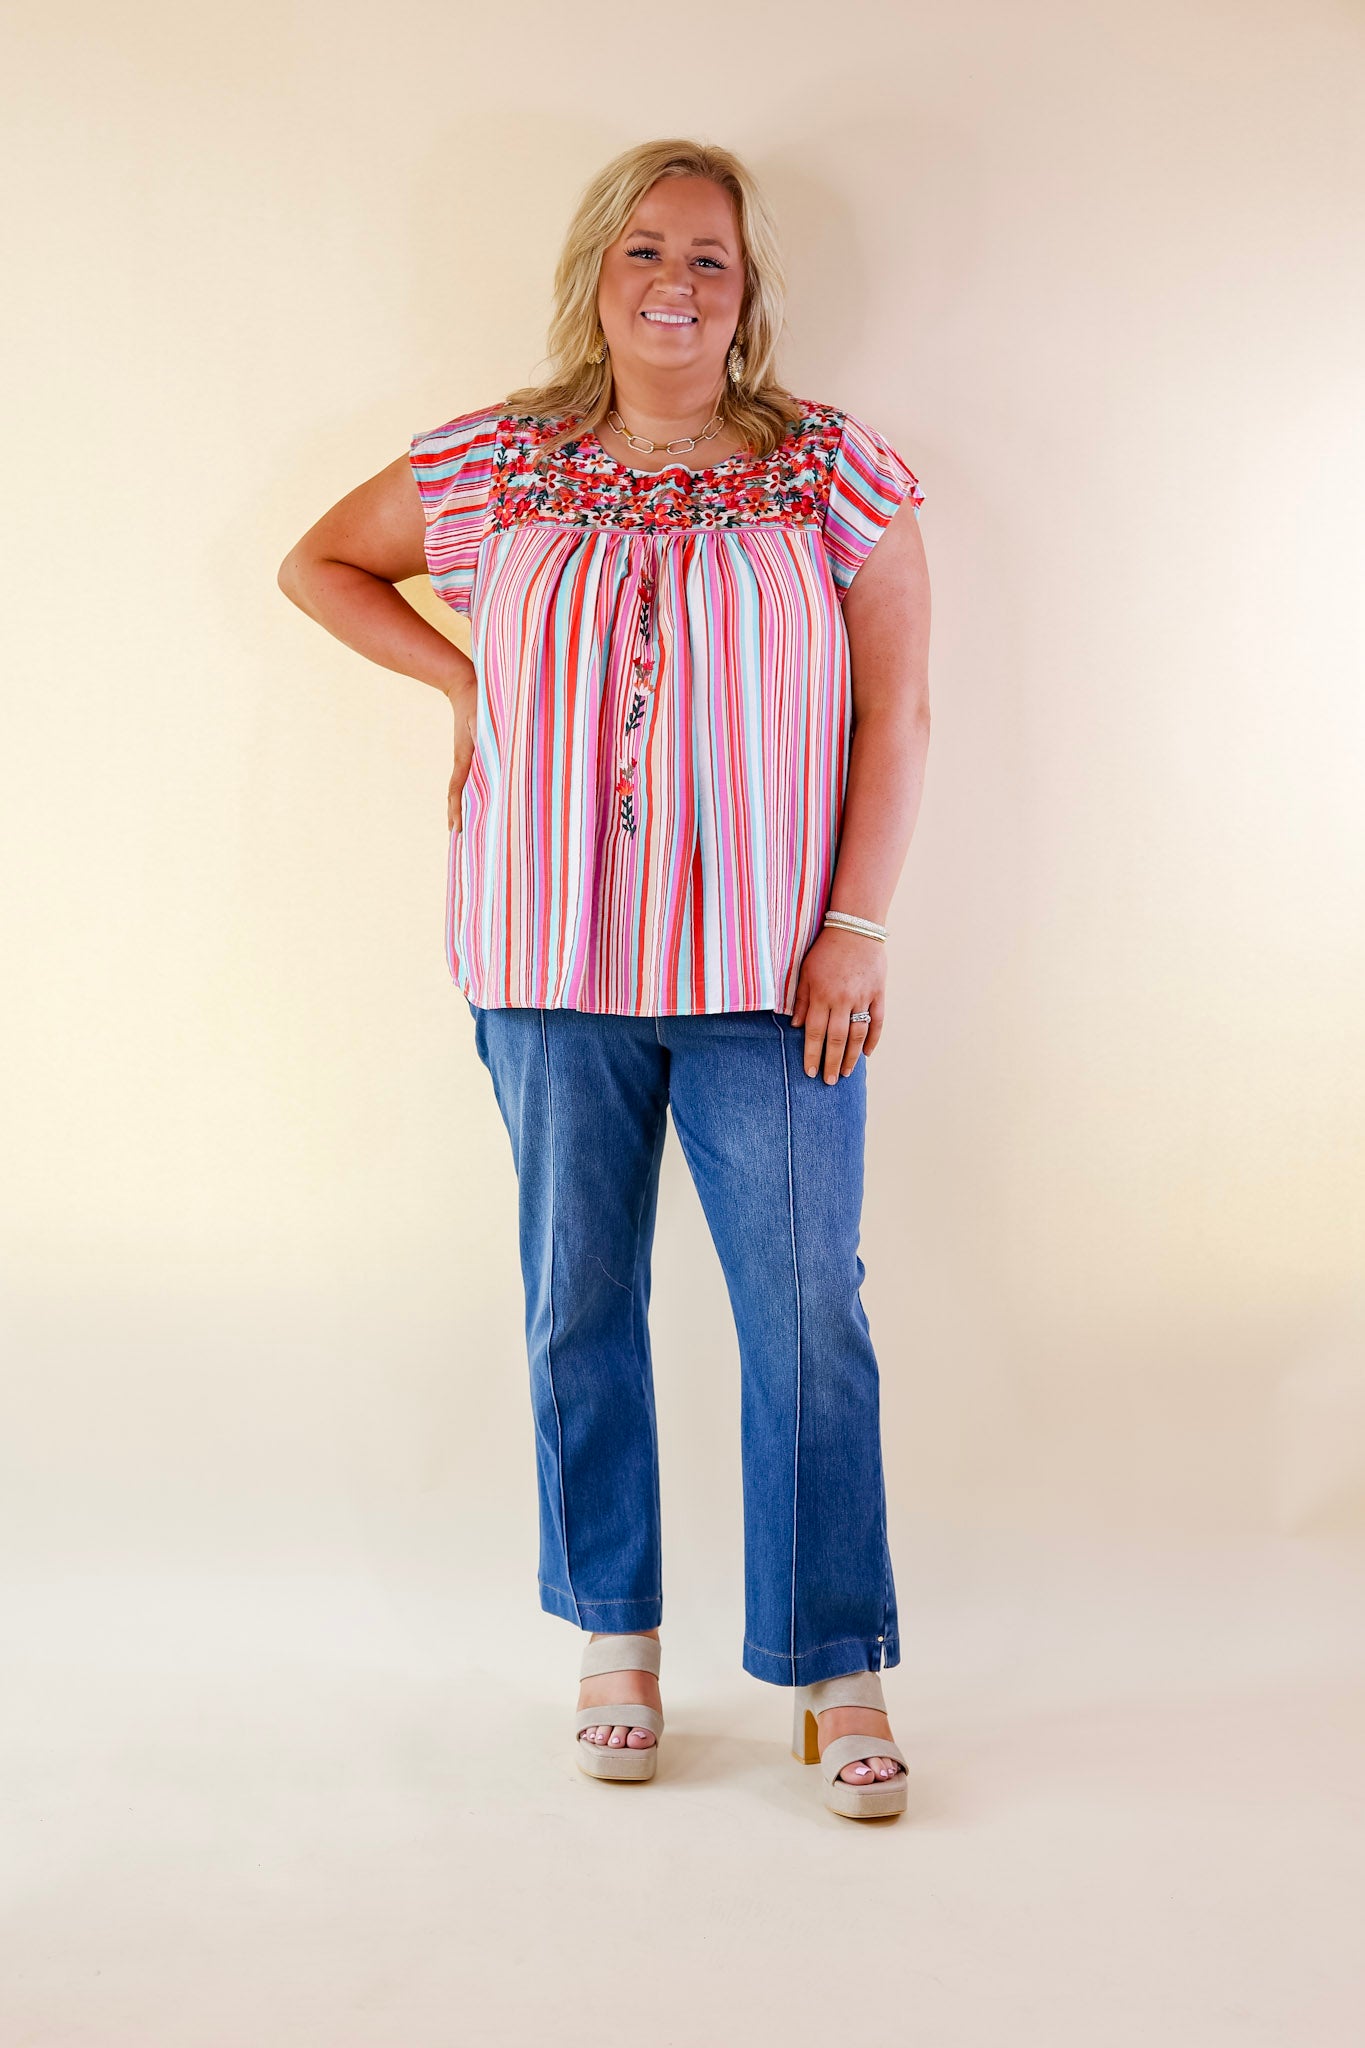 Lajitas Lady Striped Babydoll Top with Floral Embroidery in Pink and Turquoise - Giddy Up Glamour Boutique